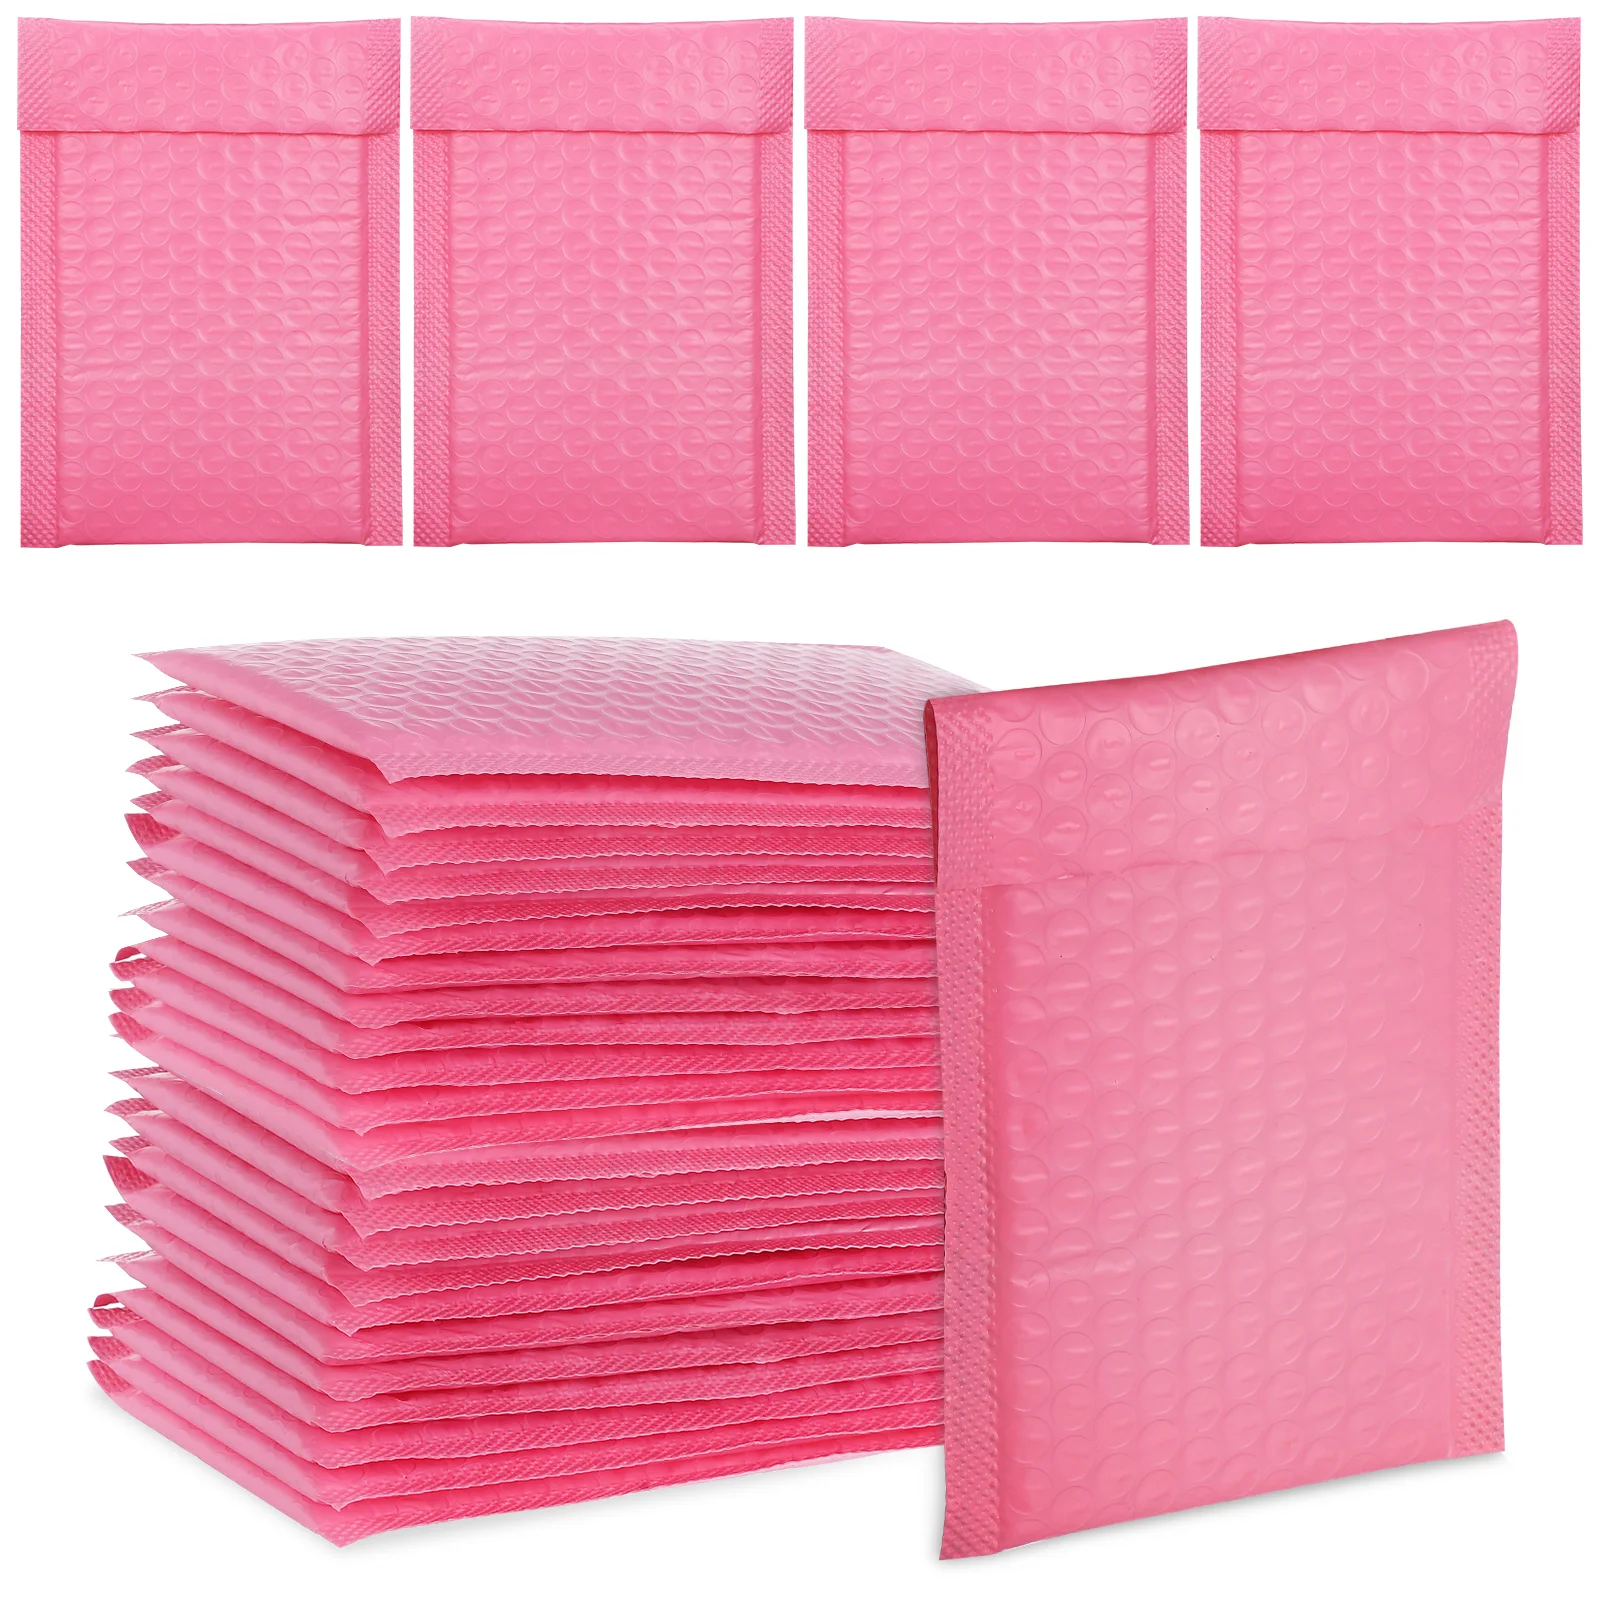 

30 Pcs Self-sealing Mailer Bag Packaging Envelopes For Small Business Packing Shipping Mailing Padded Bubbles